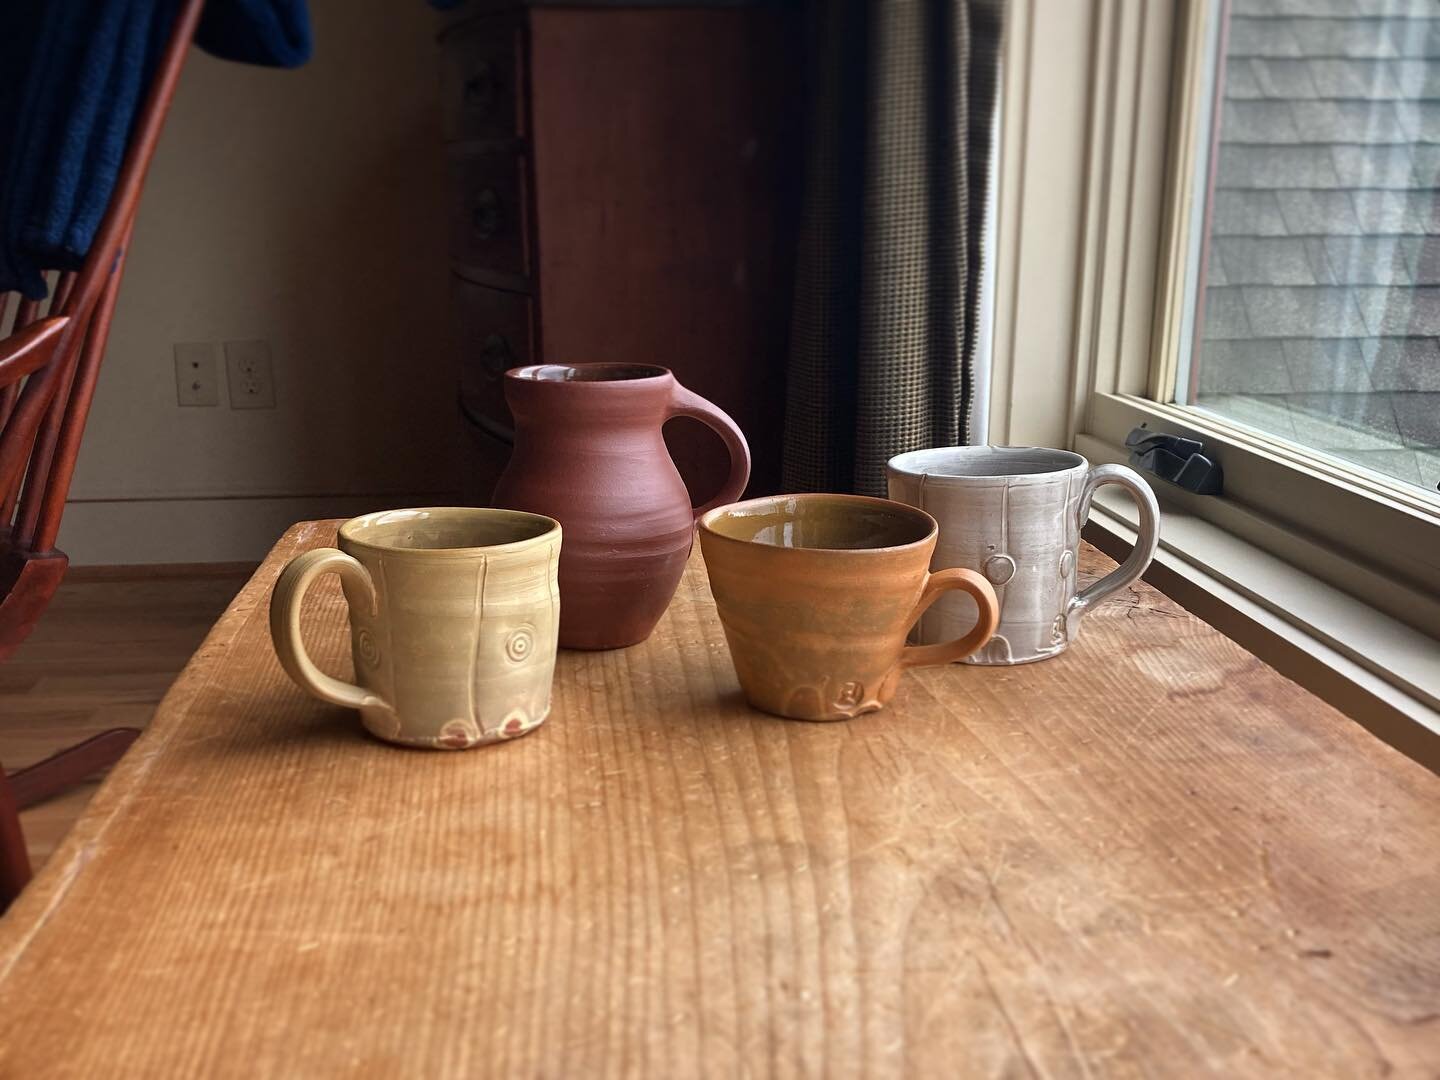 Stowing away many mugs for @stcroixvalleypotterytour &hellip; here&rsquo;s a sampling of some new colors